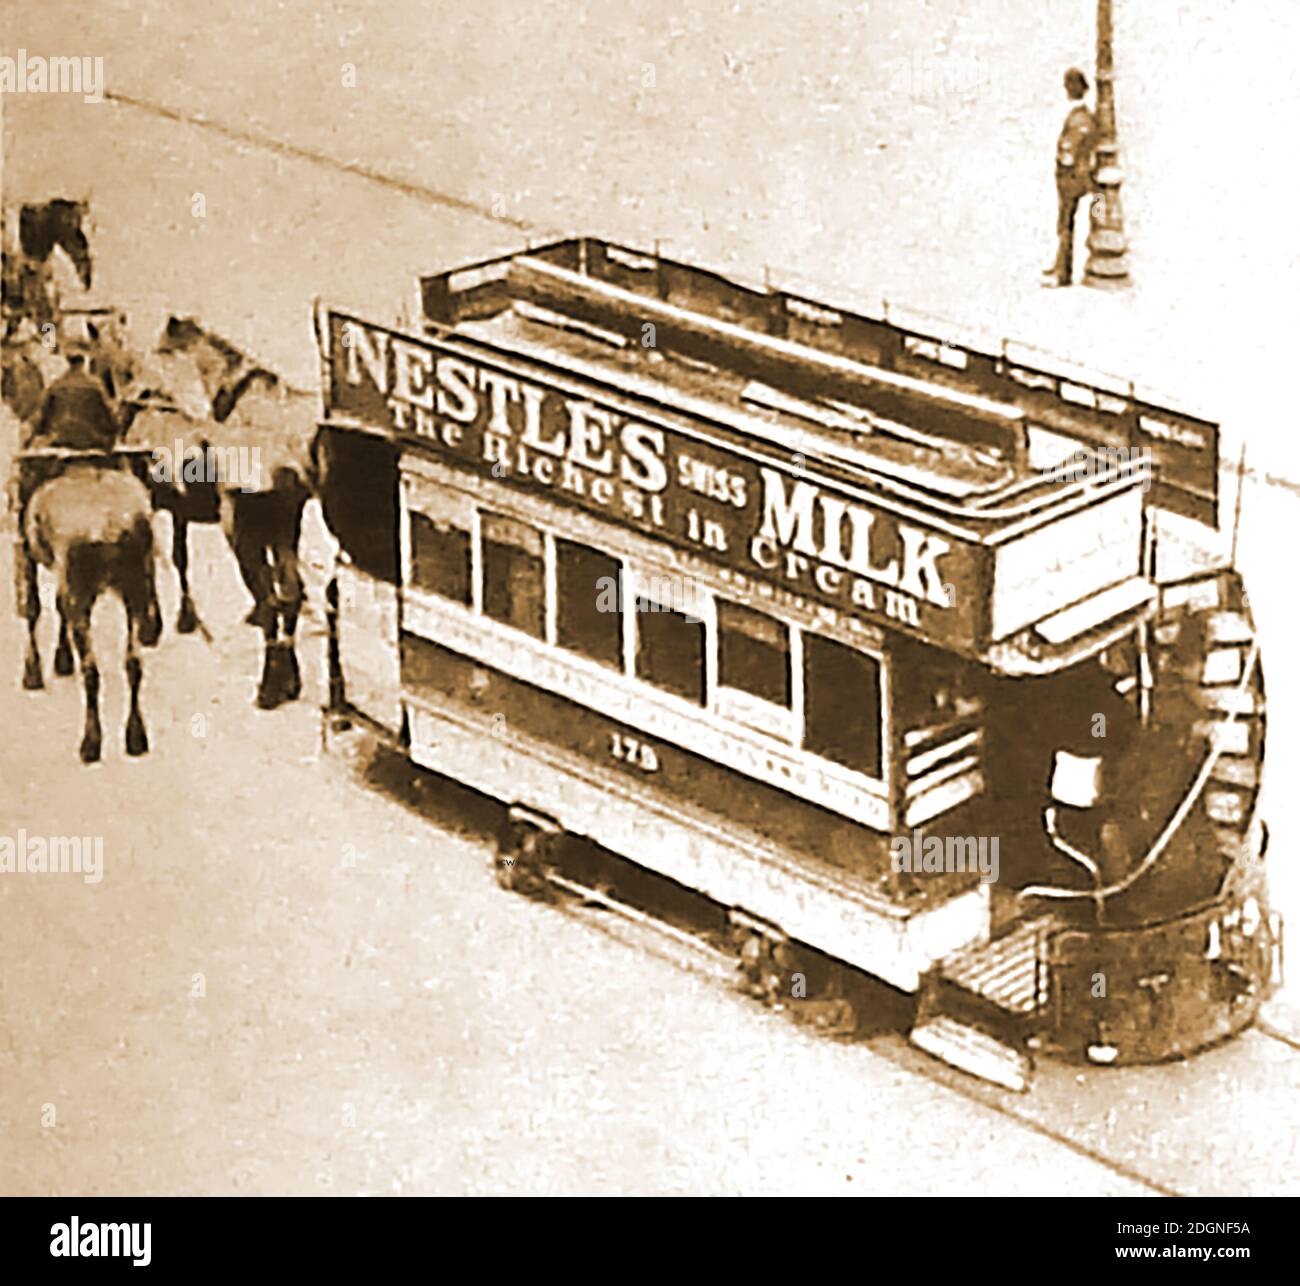 A Victorian horse-drawn tram (No. 173) , advertising Nestles Milk. ---- American, George Francis Train first introduced trams  to Birkenhead in 1860 but was jailed for 'breaking and injuring' the highway with his when he laid tram tracks on the roads of London. After an 1870 Act of Parliament made things easier after which many local horse-drawn tramway companies  were formed.The last horse-drawn tram ended in  London in 1915 Stock Photo